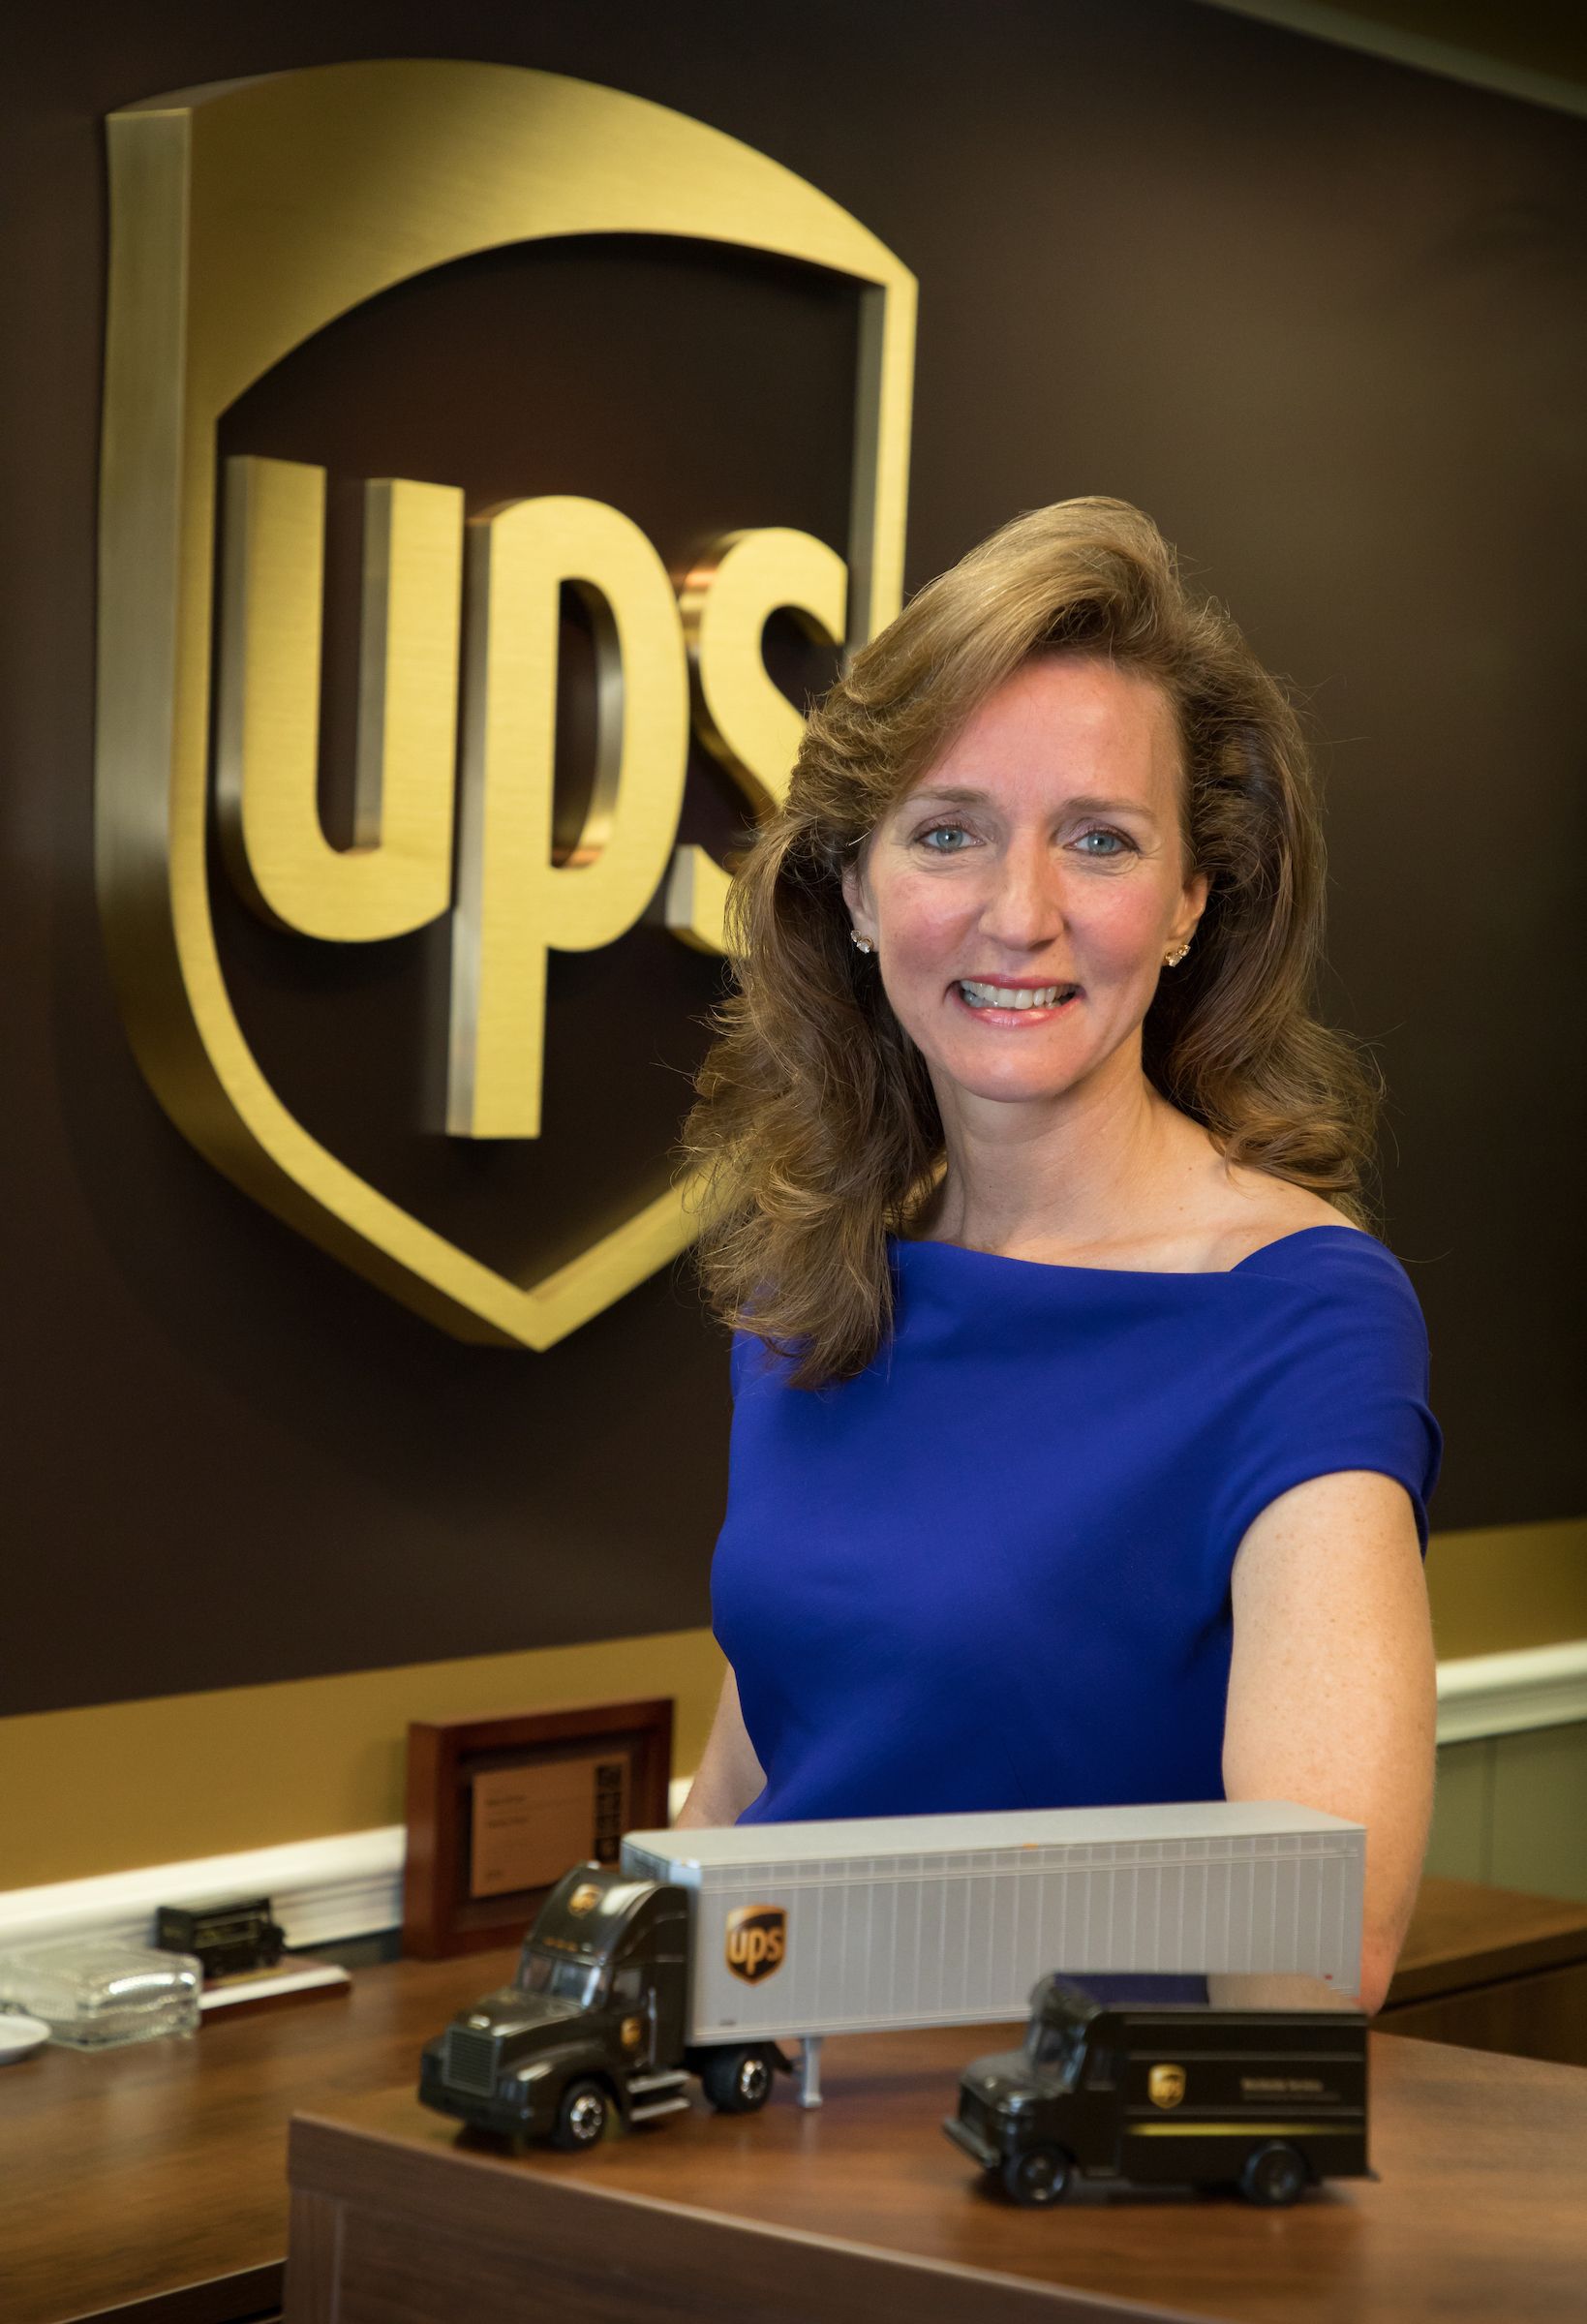 Laura Lane, president of Global Public Affairs, United Parcel Service, photographed at her office in Washington, D.C. Photo by David Bohrer - August 16, 2017.